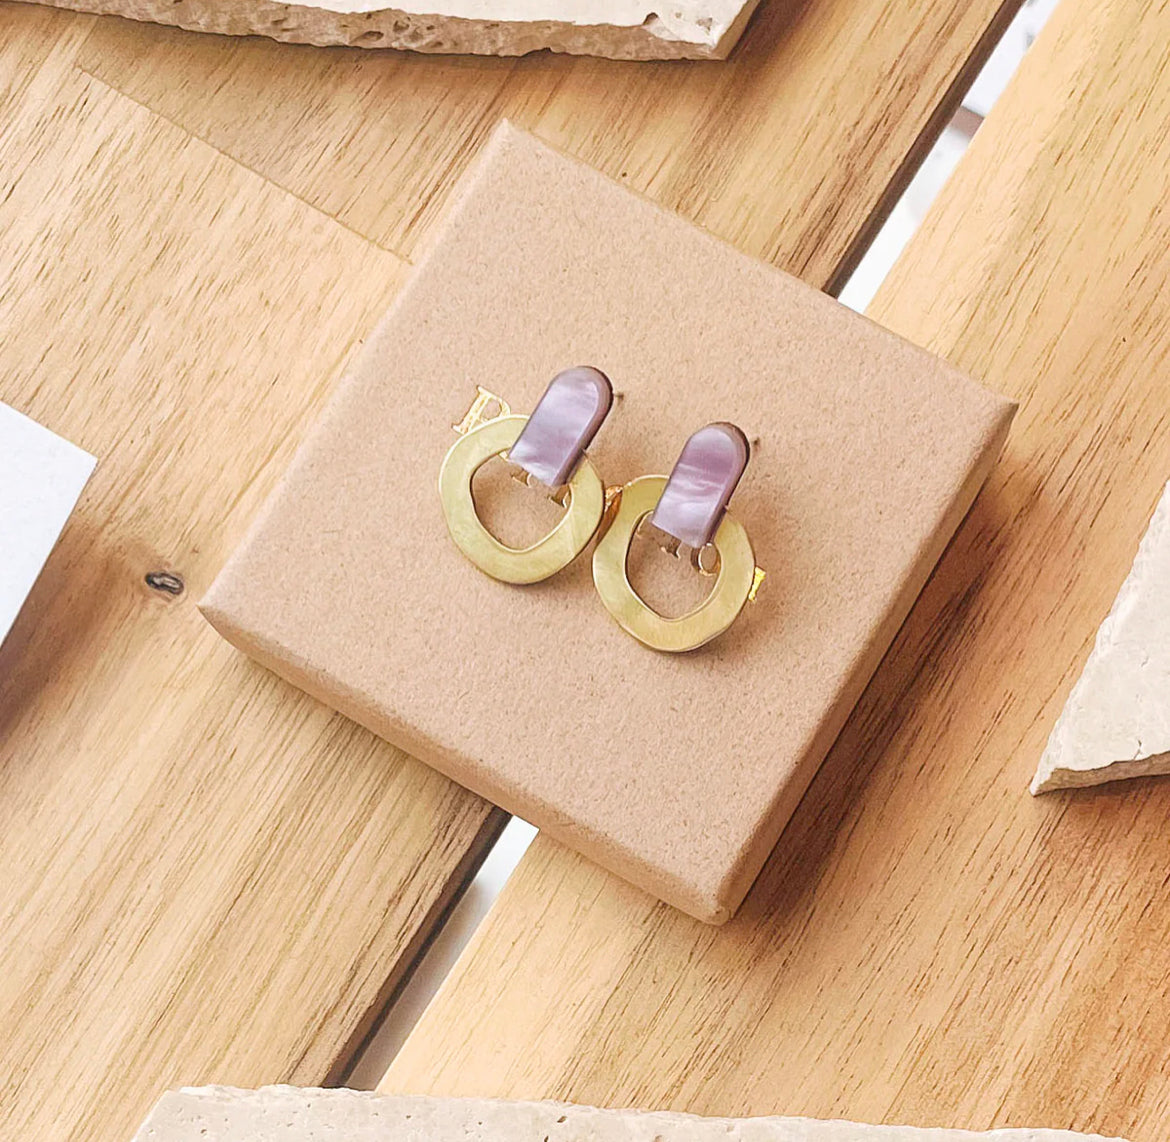 Around Brass Stud Earrings in Lilac - THE BRISTOL ARTISAN